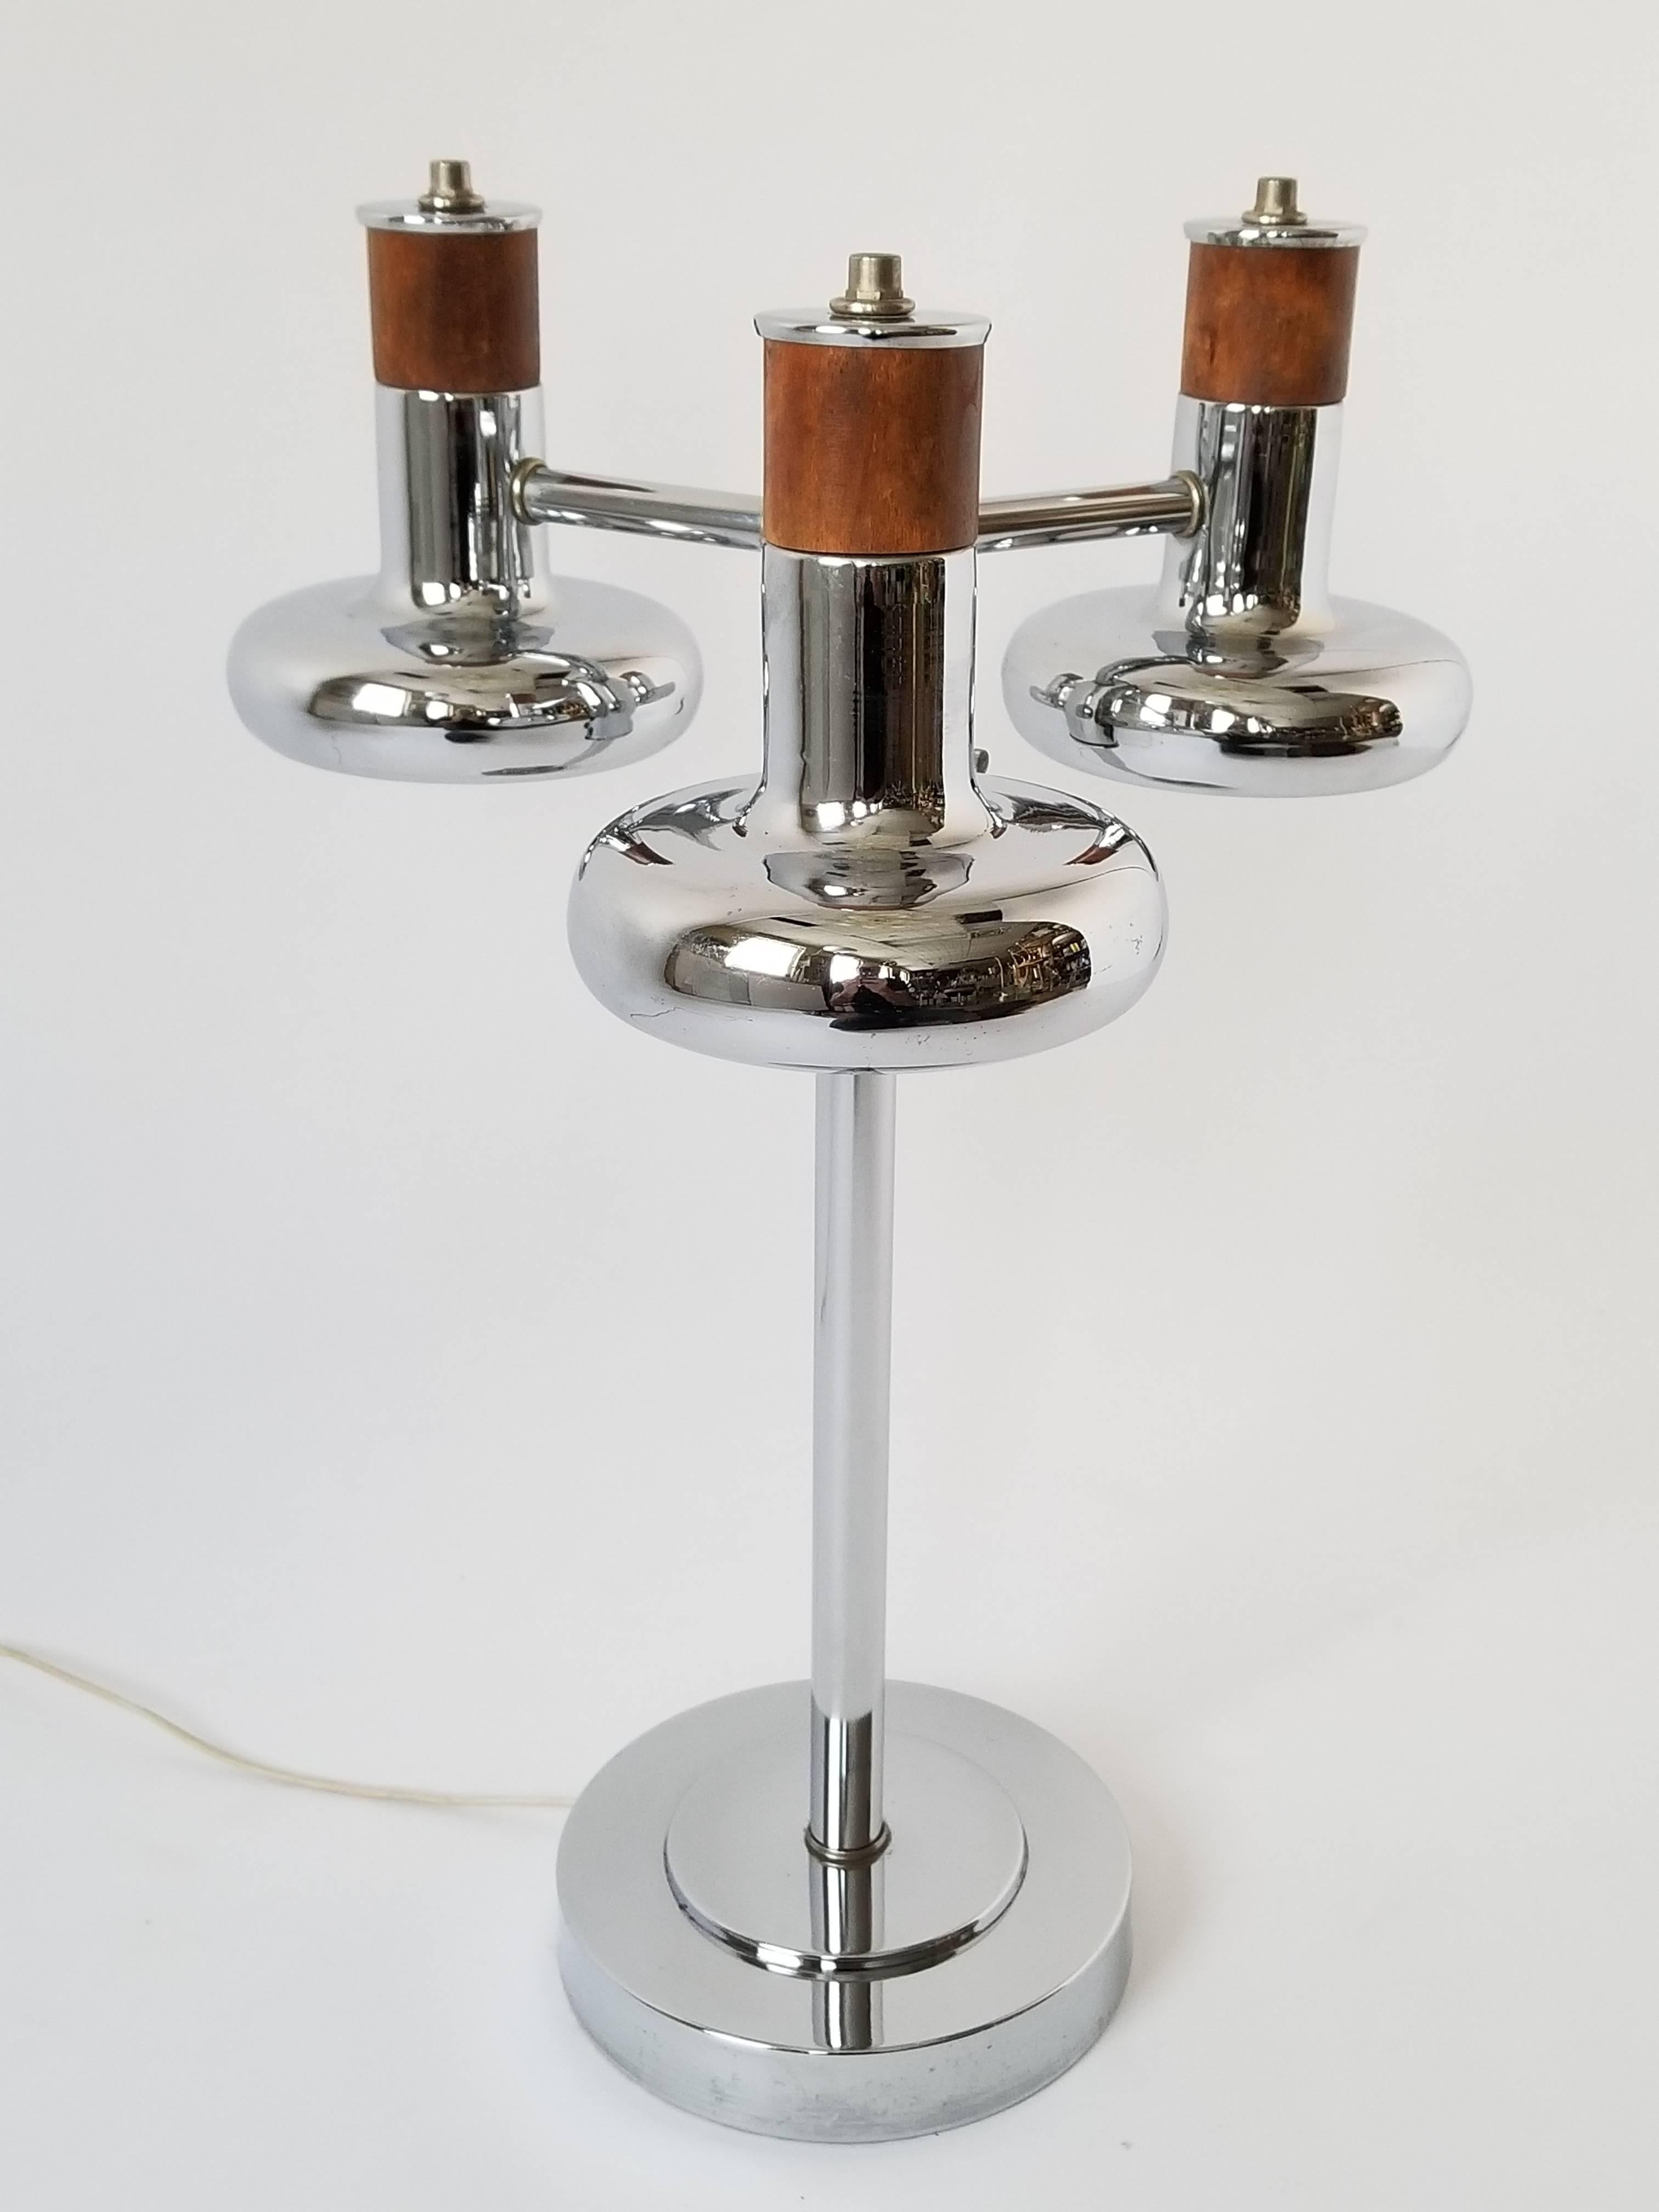 American 1970s Three Heads Chrome Table Lamp with Walnut Insert, USA